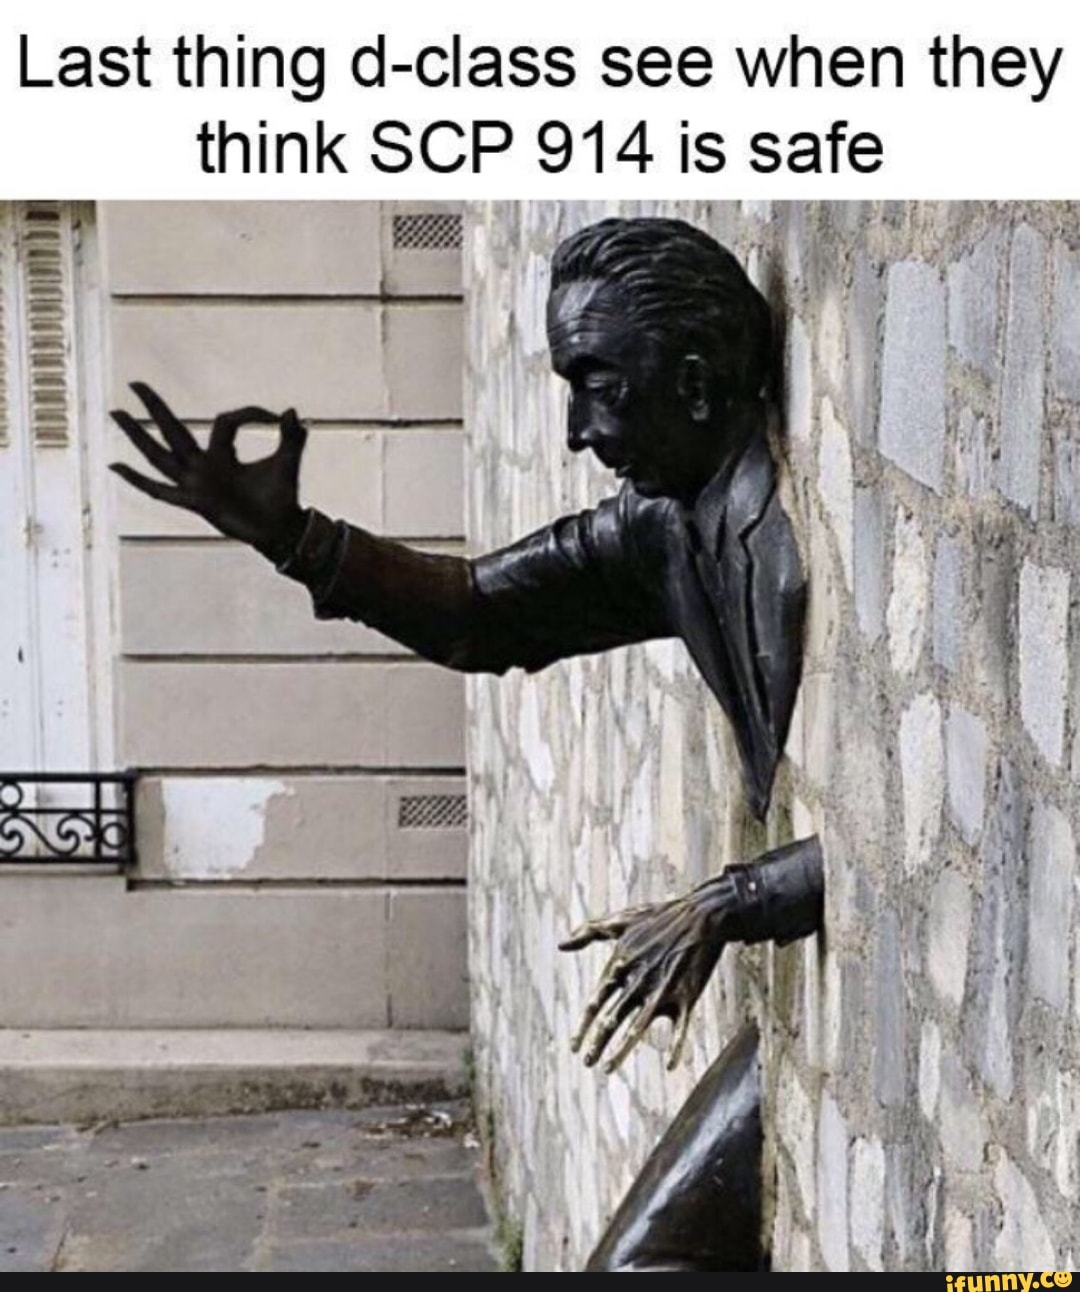 what is scp 914